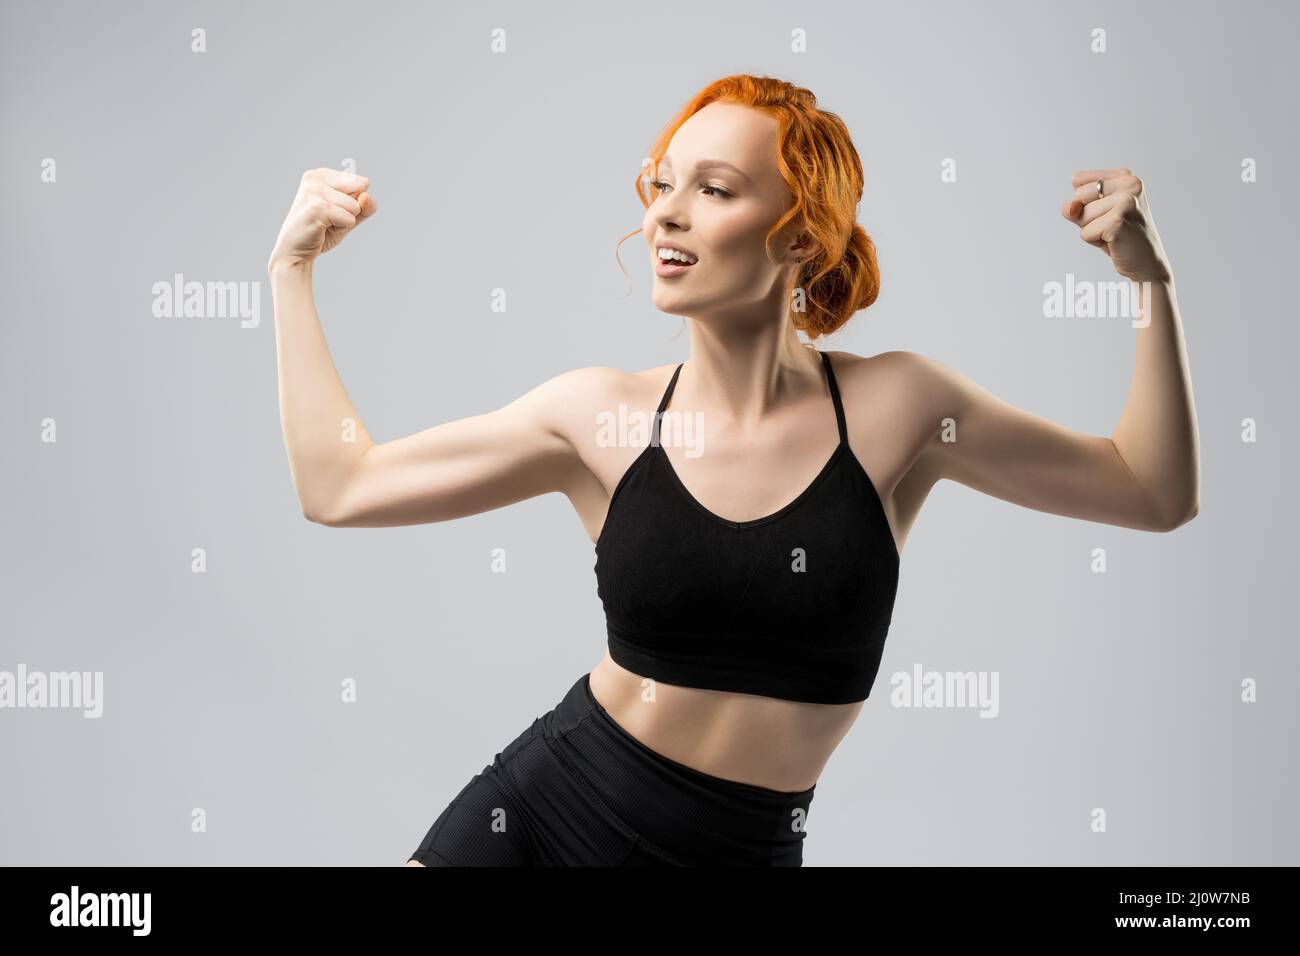 Positive young sportswoman showing biceps and smiling in studio Stock Photo